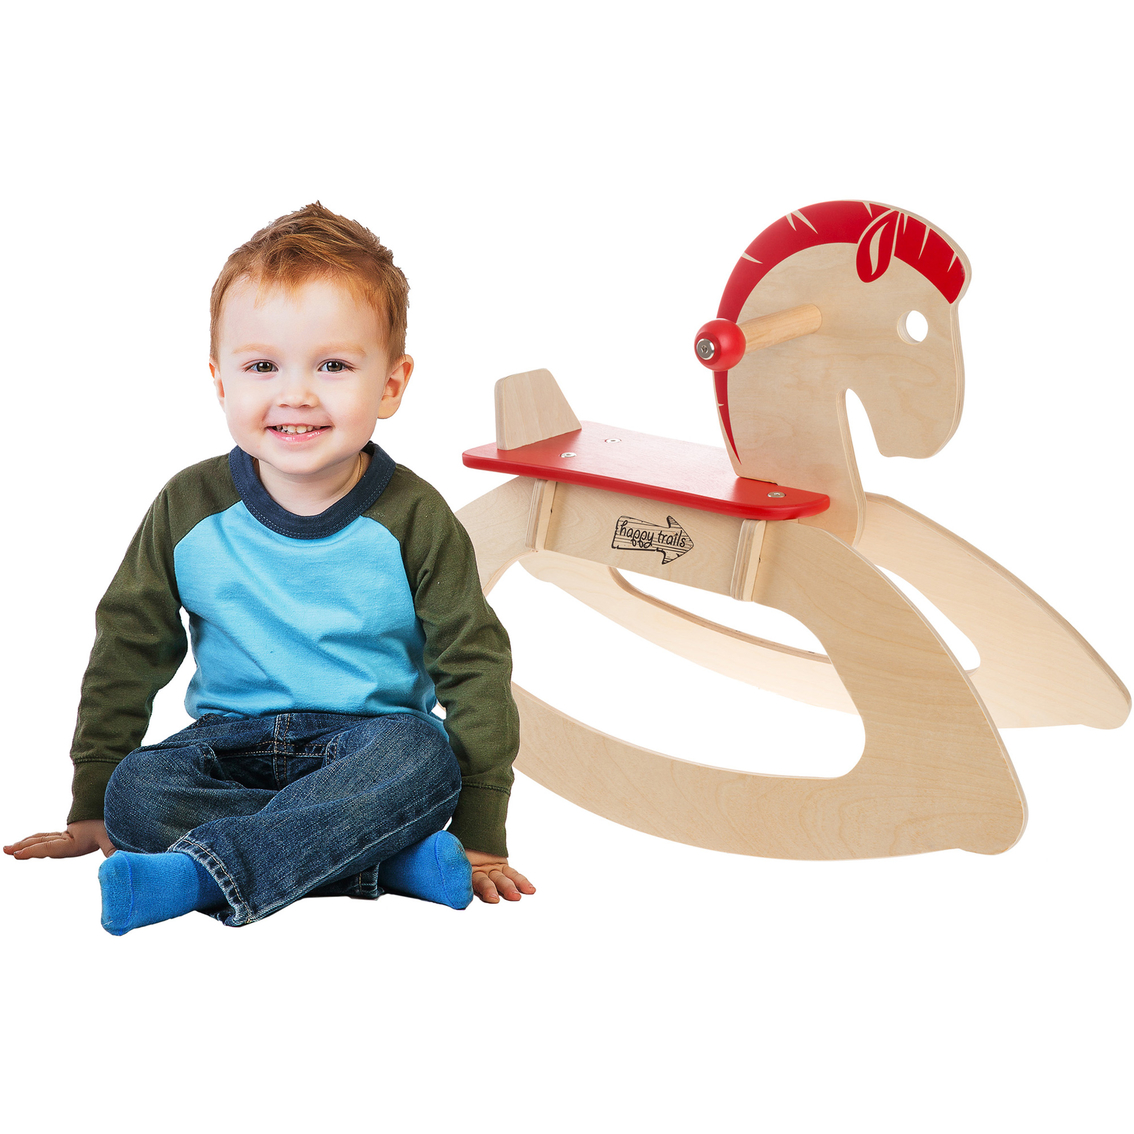 Happy Trails Wooden Rocking Horse - Image 5 of 6